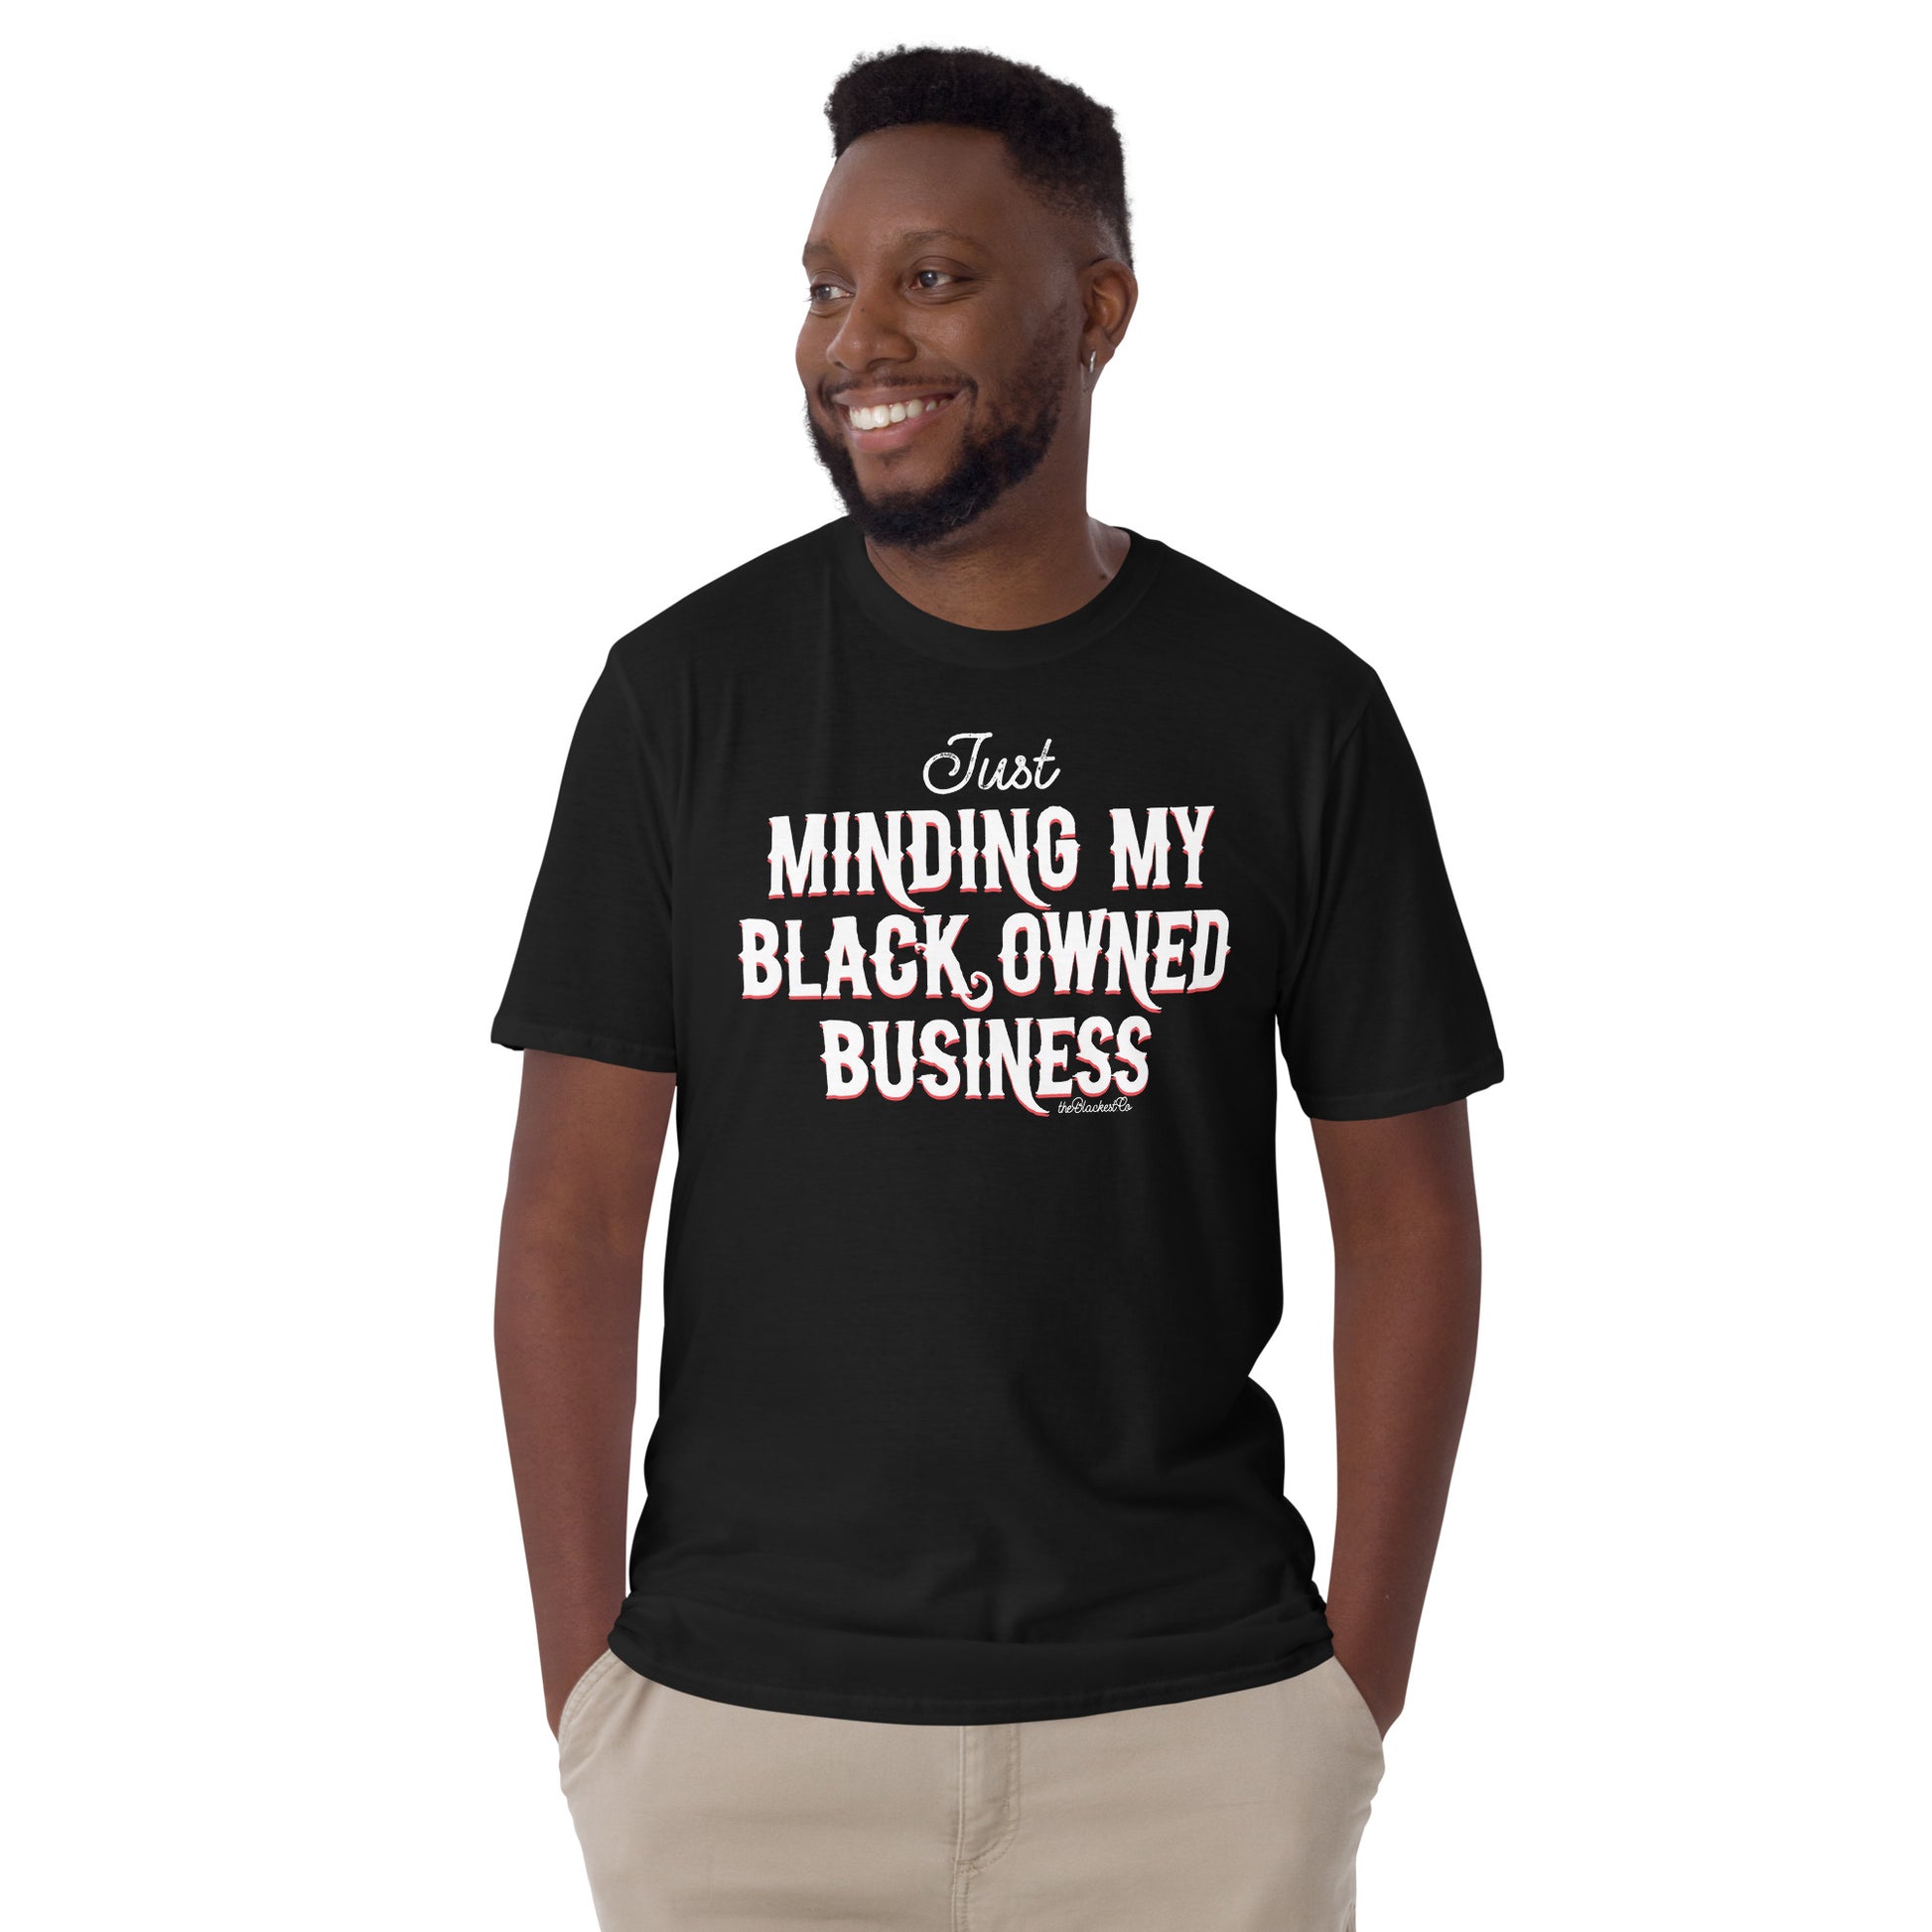 man wearing black t shirt with Just Minding My Black Owned Businesses design on it